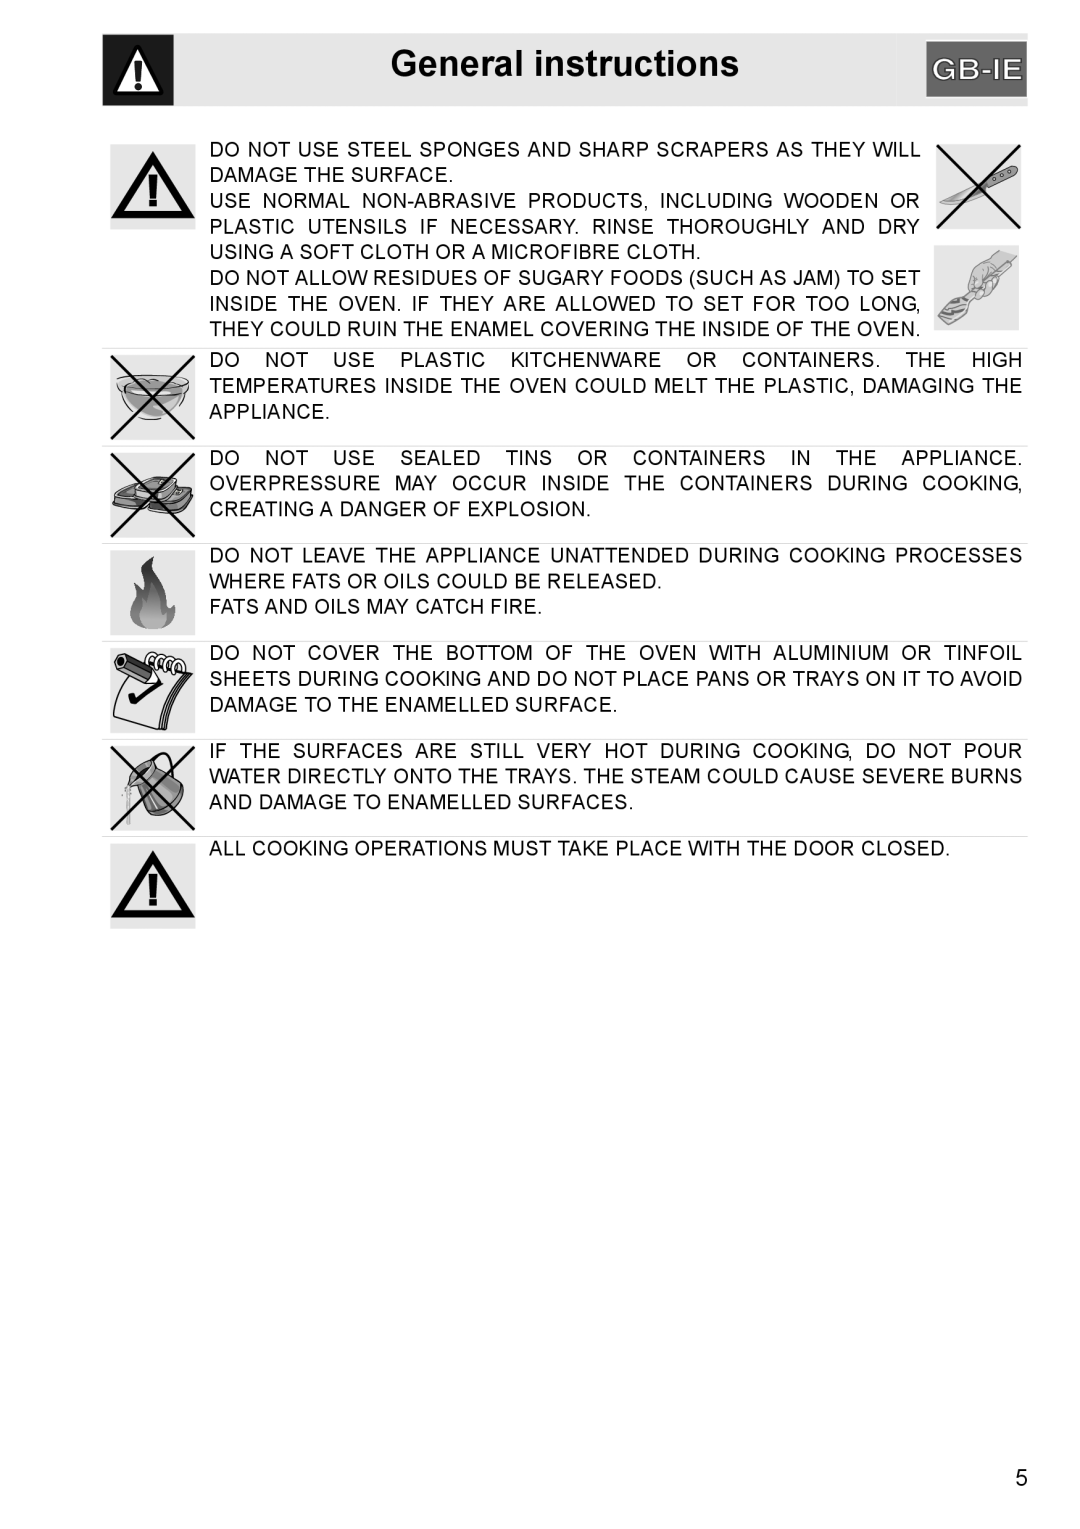 GE SA304X-8 manual General instructions, Fats And Oils May Catch Fire 